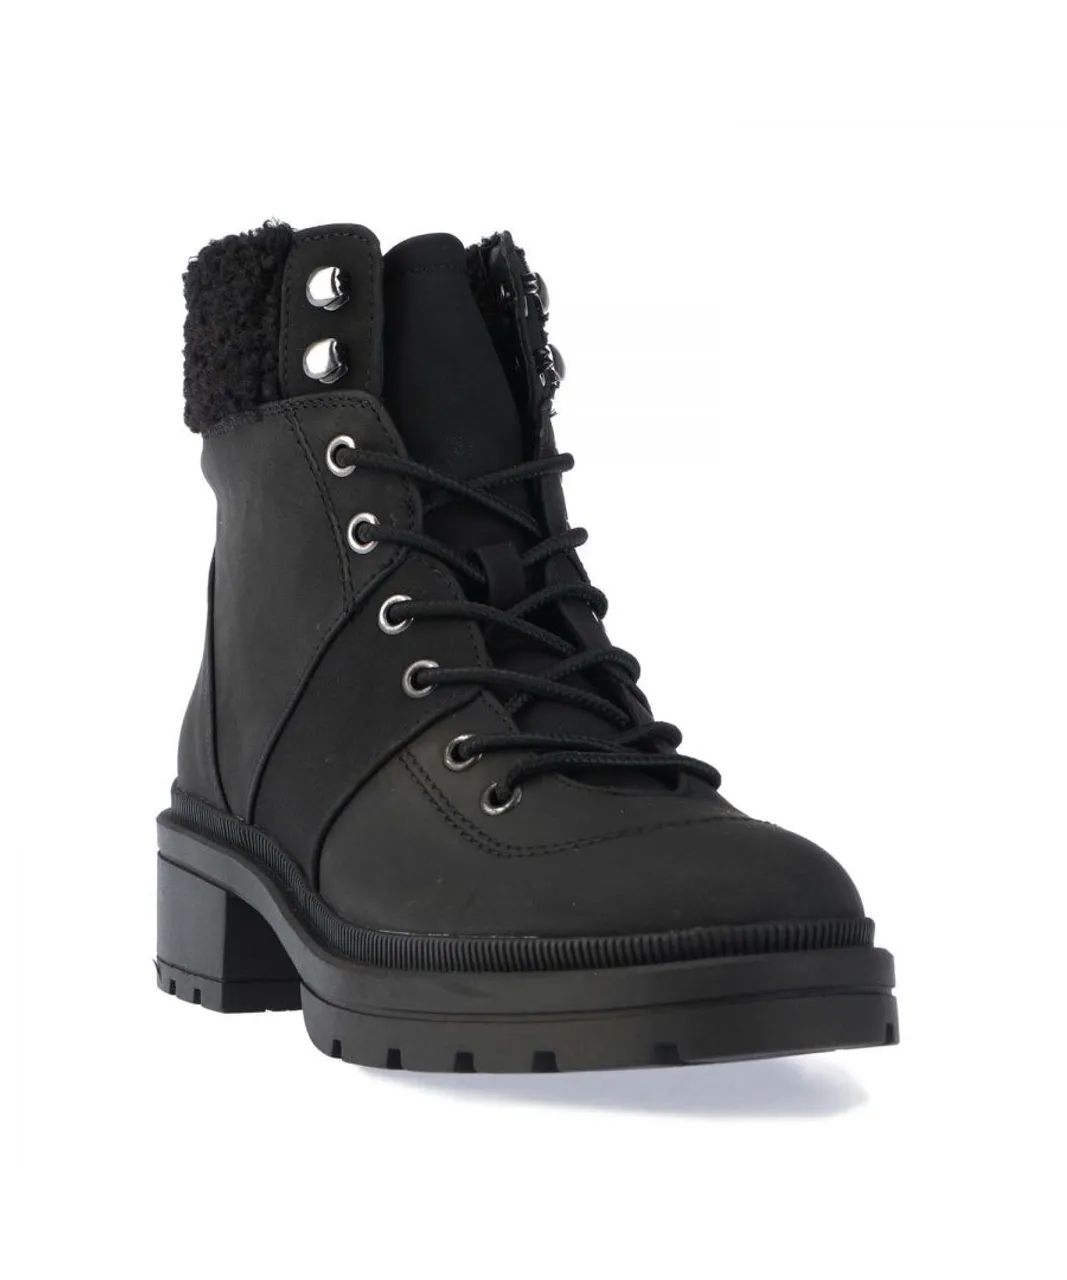 Rocket Dog Womenss Icy Ludo Boots in Black